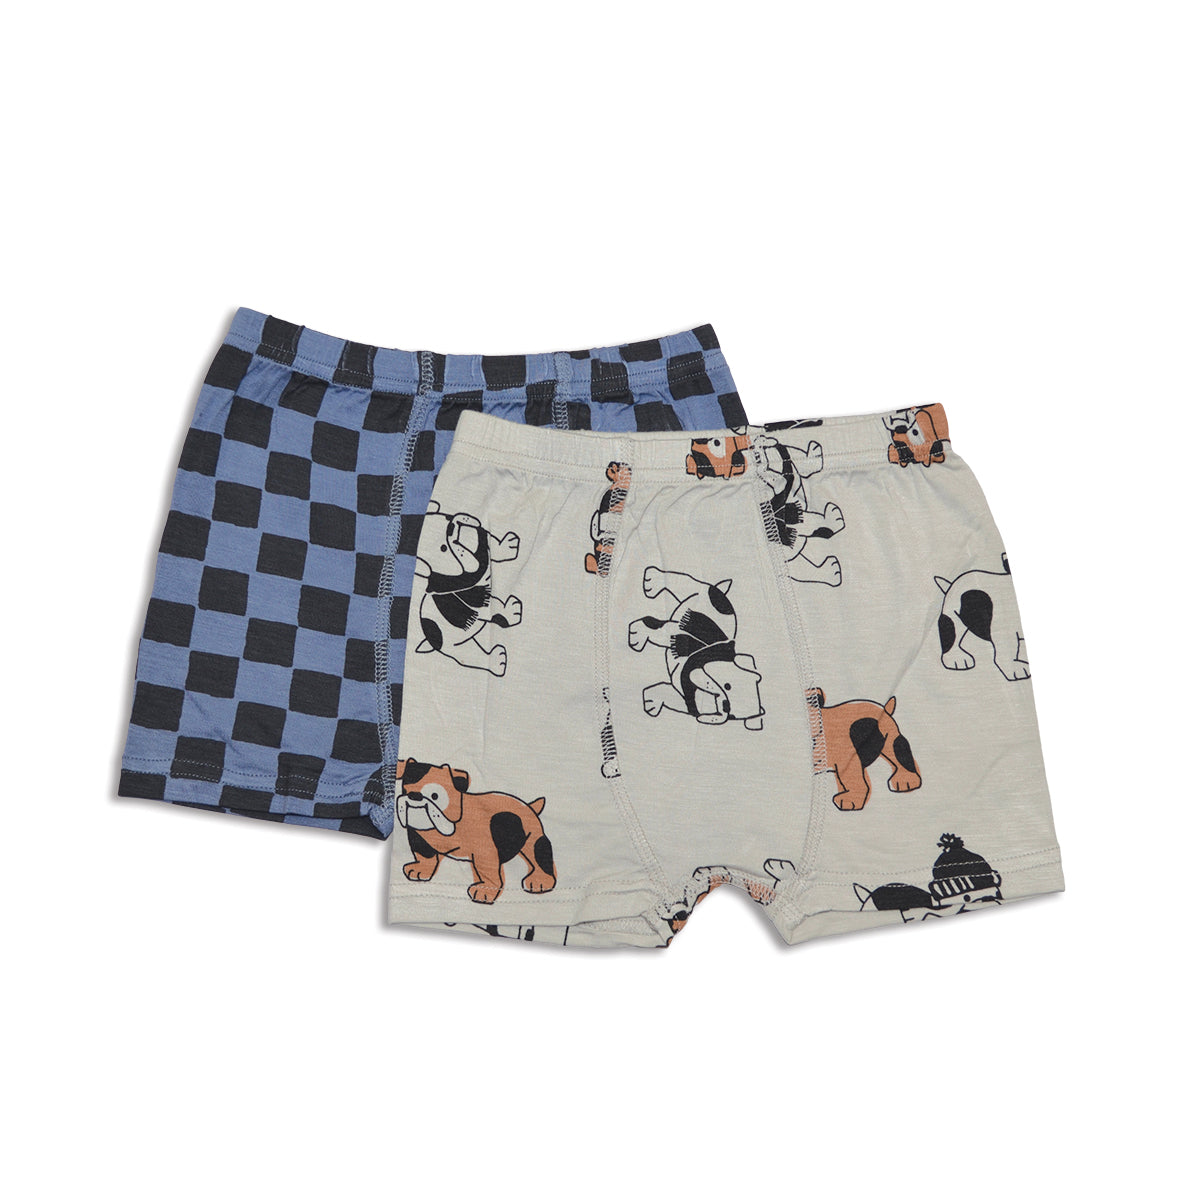 Women's Boxer Shorts, Womens Boxer Briefs, Womens Boxers, Pajama Shorts,  Bamboo Pajama Bottoms, Gifts for Her -  Canada